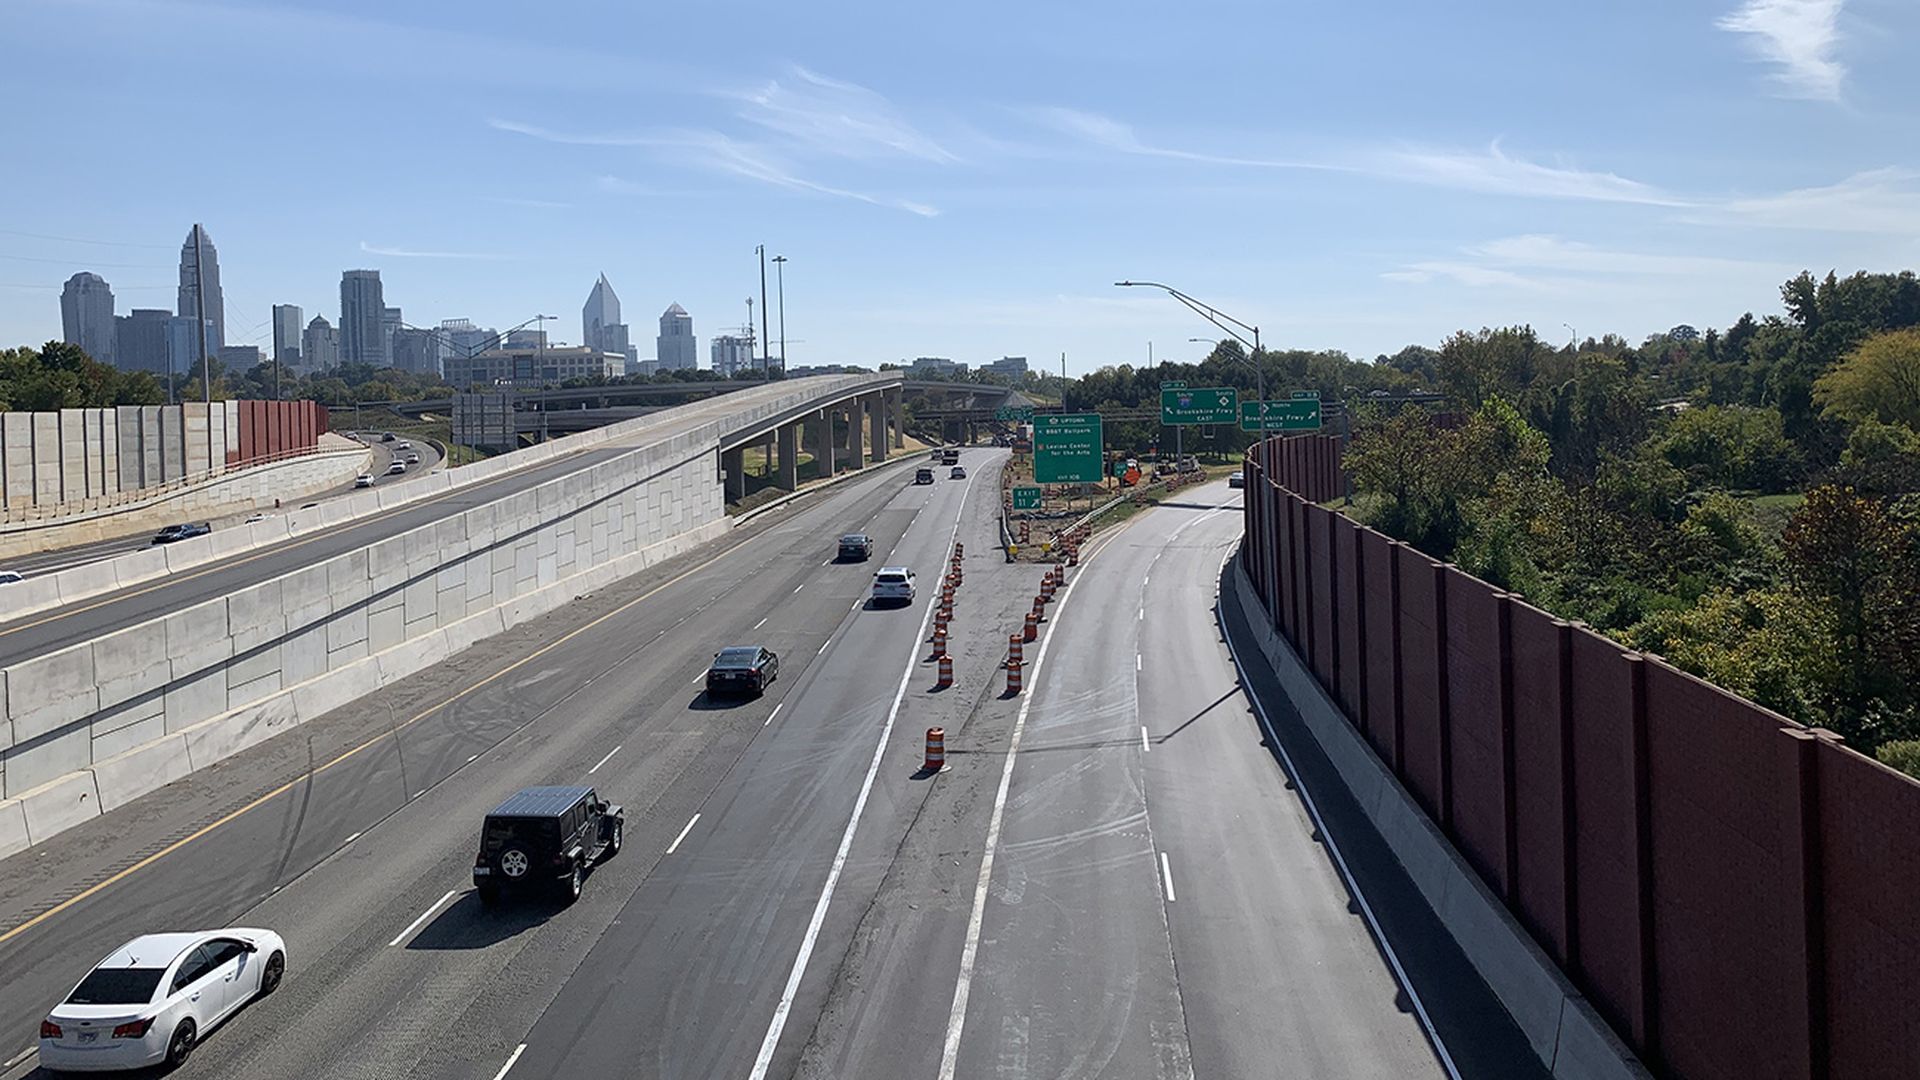 View of Uptown from the Brookshire Freeway bridge in McCrorey Heights